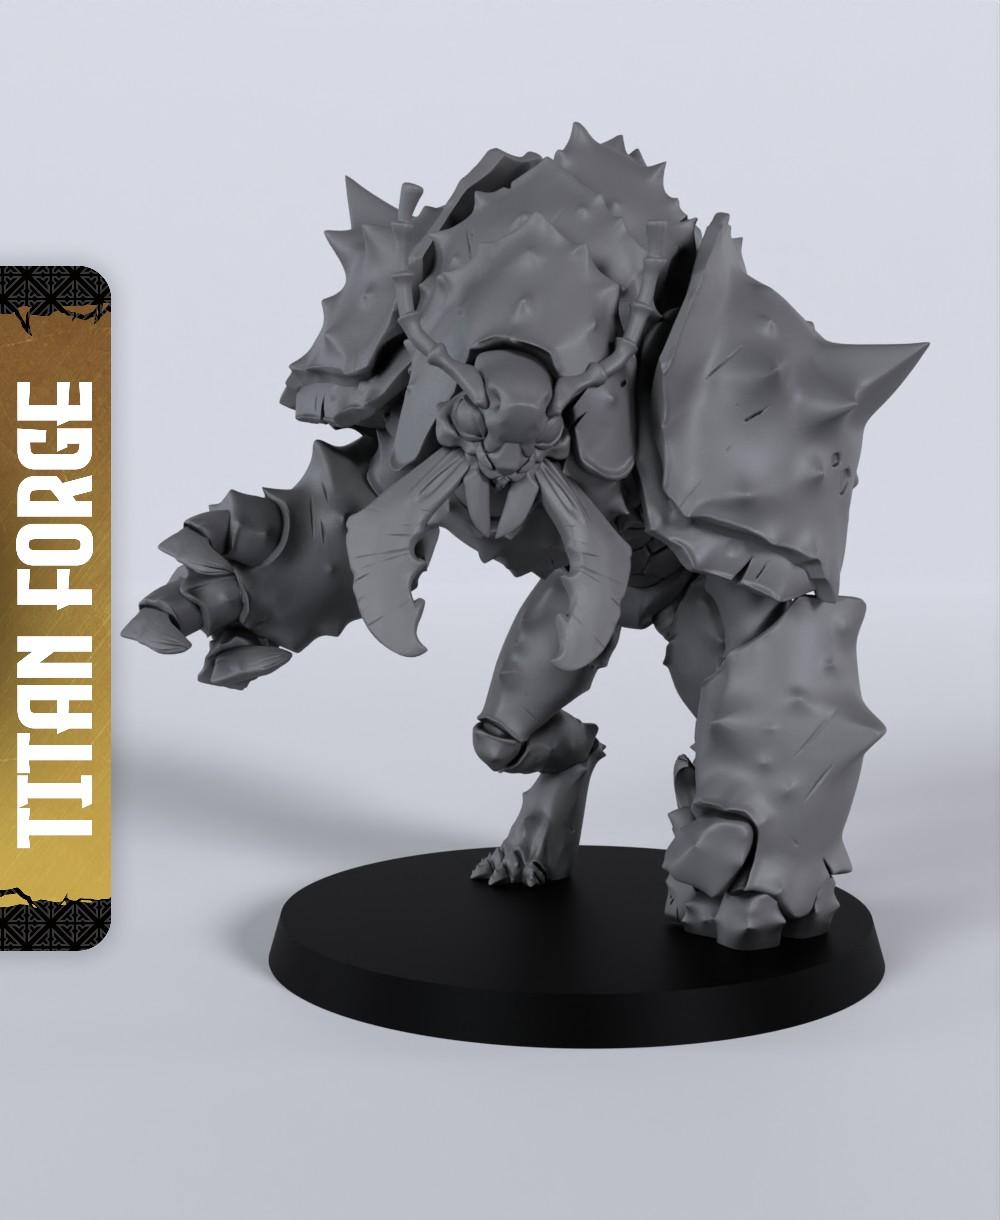 Umber Hulk - With Free Dragon Warhammer - 5e DnD Inspired for RPG and Wargamers 3d model